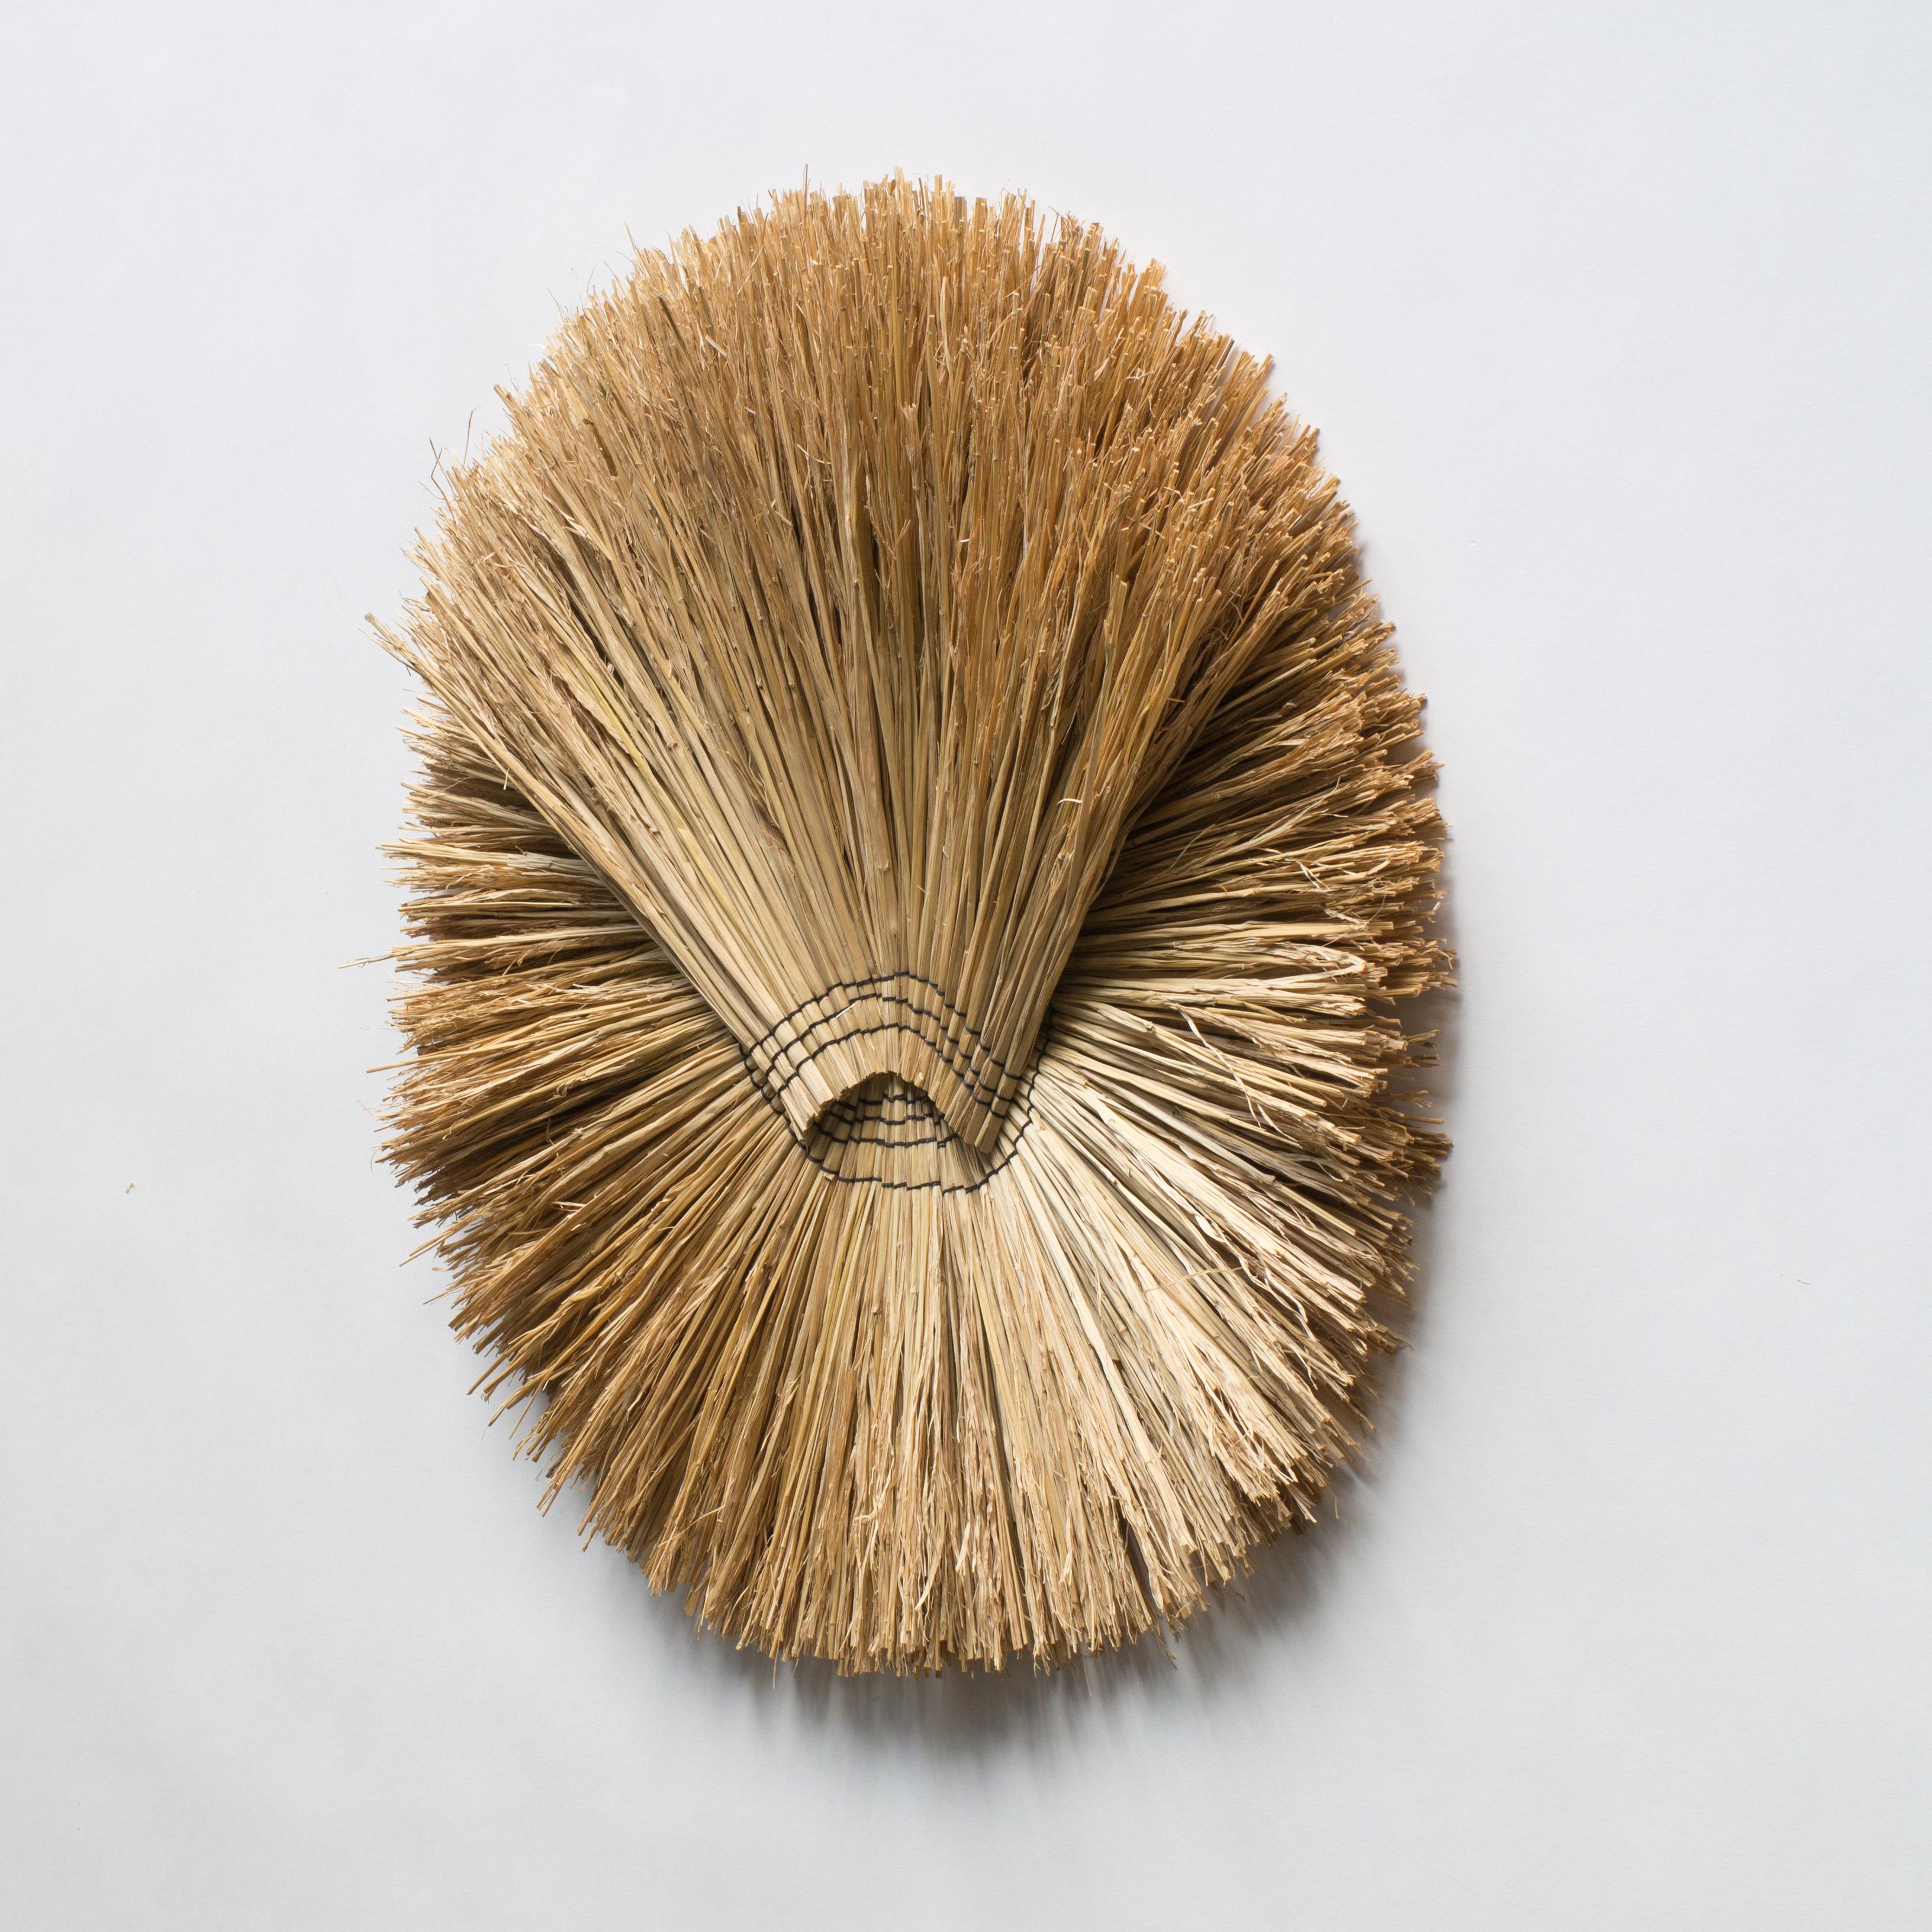 Hand-sewed rice straw art by Arko. 
Title: untitled
This work has the feelings of contemporary tribal art, contemporary Craft art, created with the respect for wild nature.
Arko is a finalist of the Loewe Craft prize 2018.